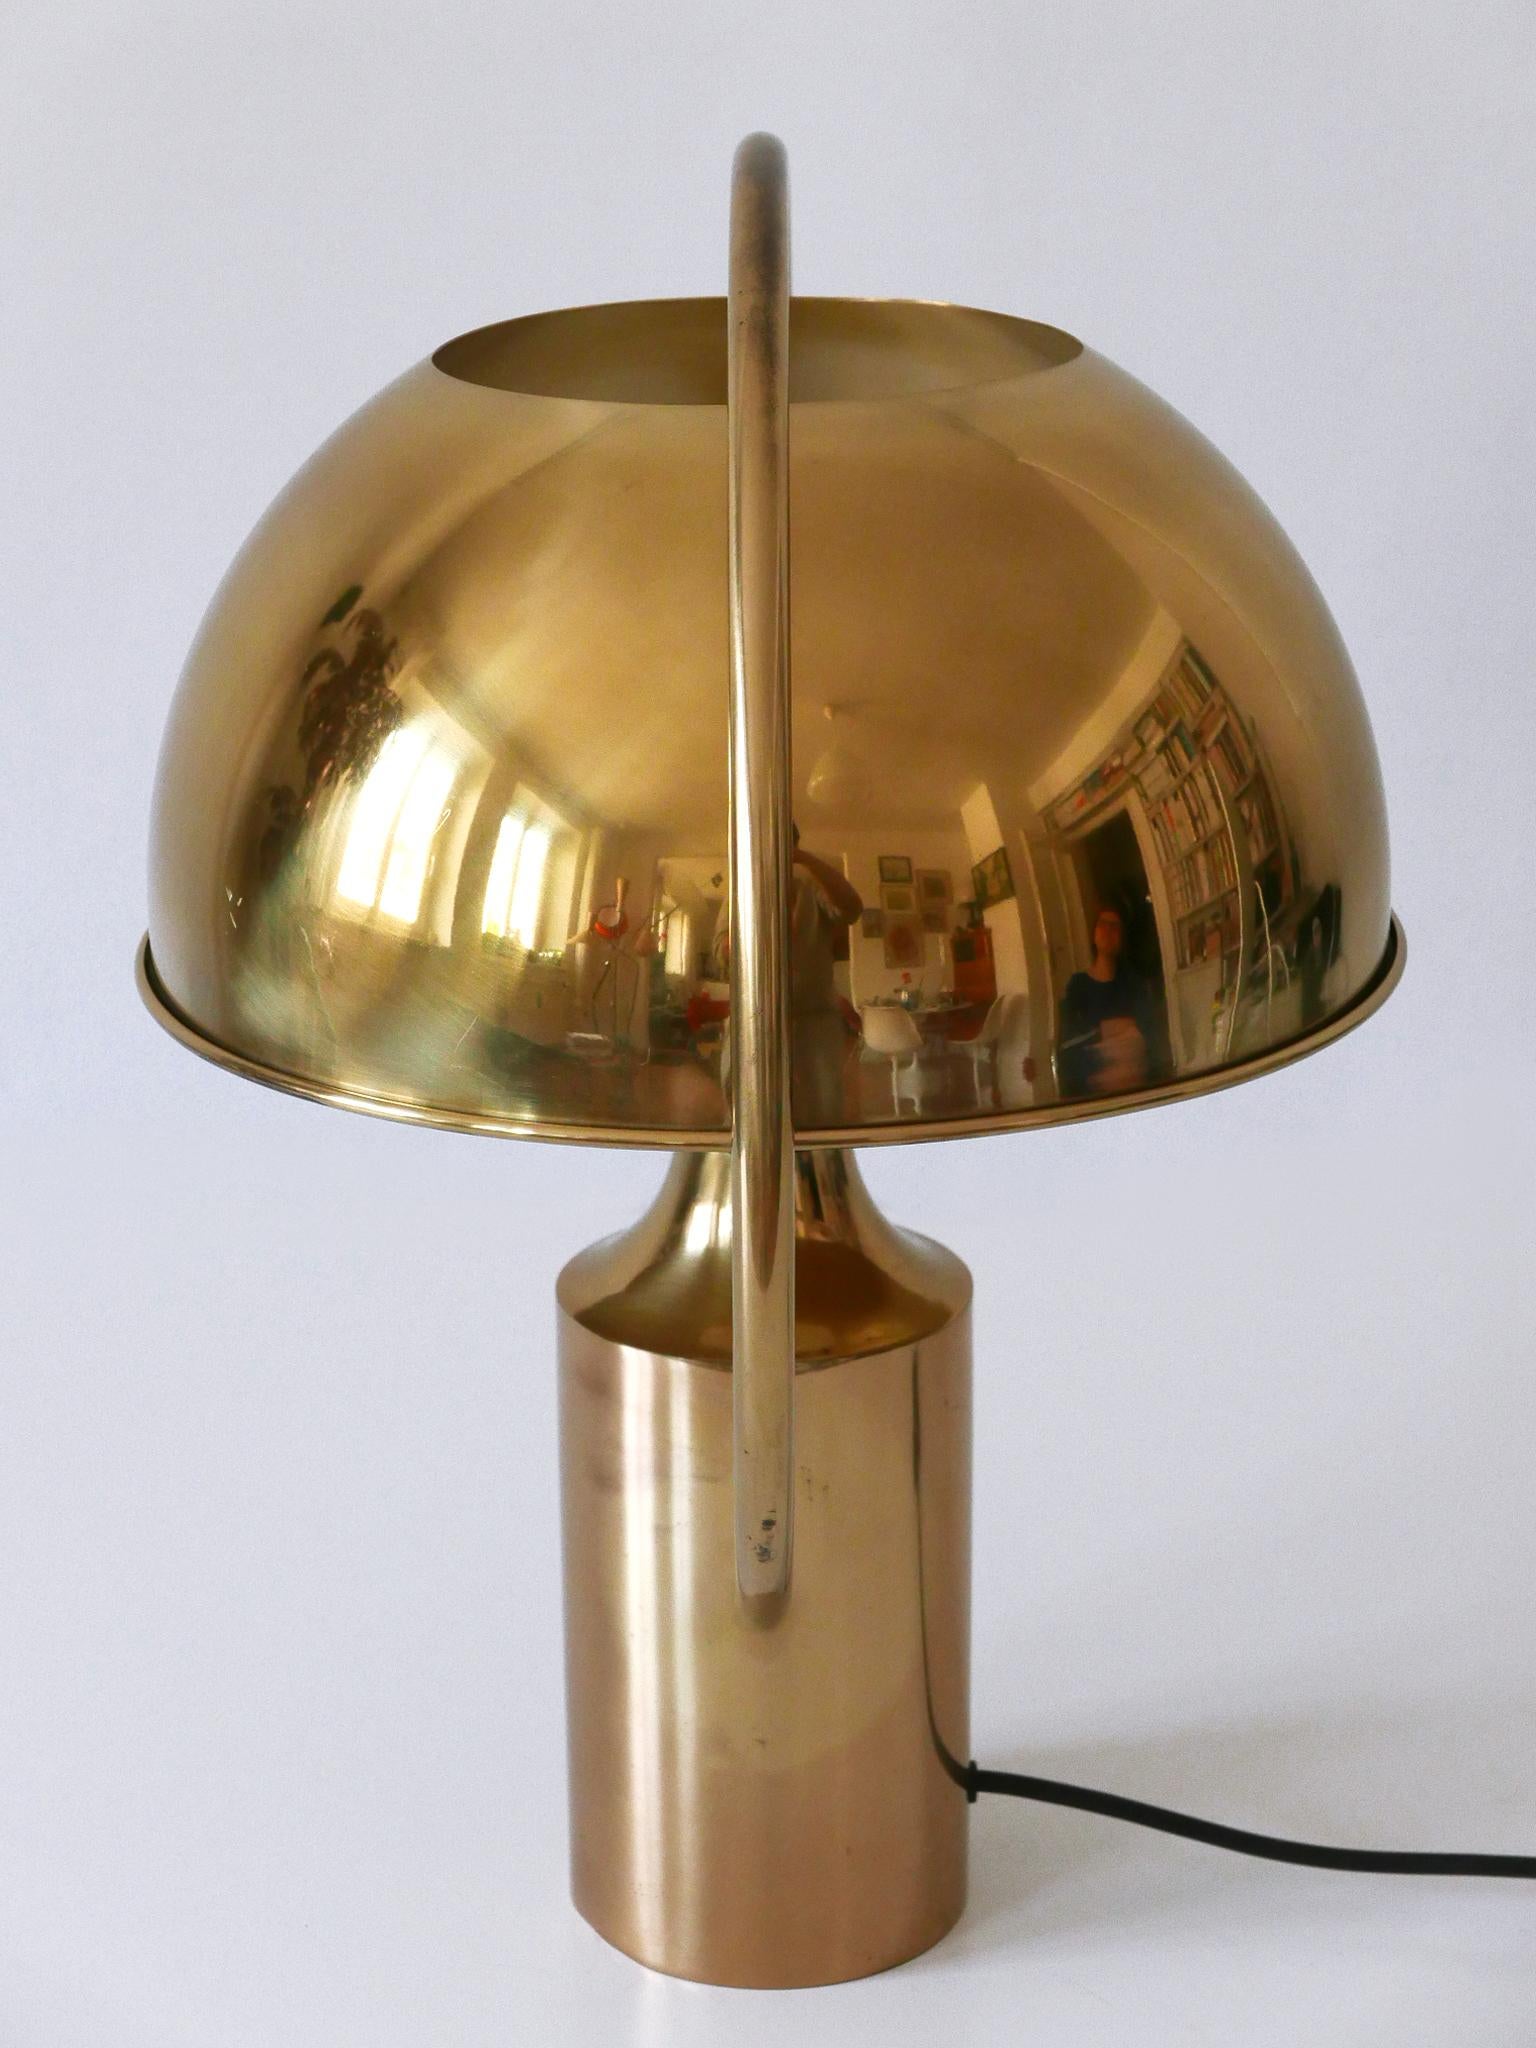 Extremely Rare Mid-Century Modern Table Lamp by Florian Schulz Germany 1970s For Sale 3